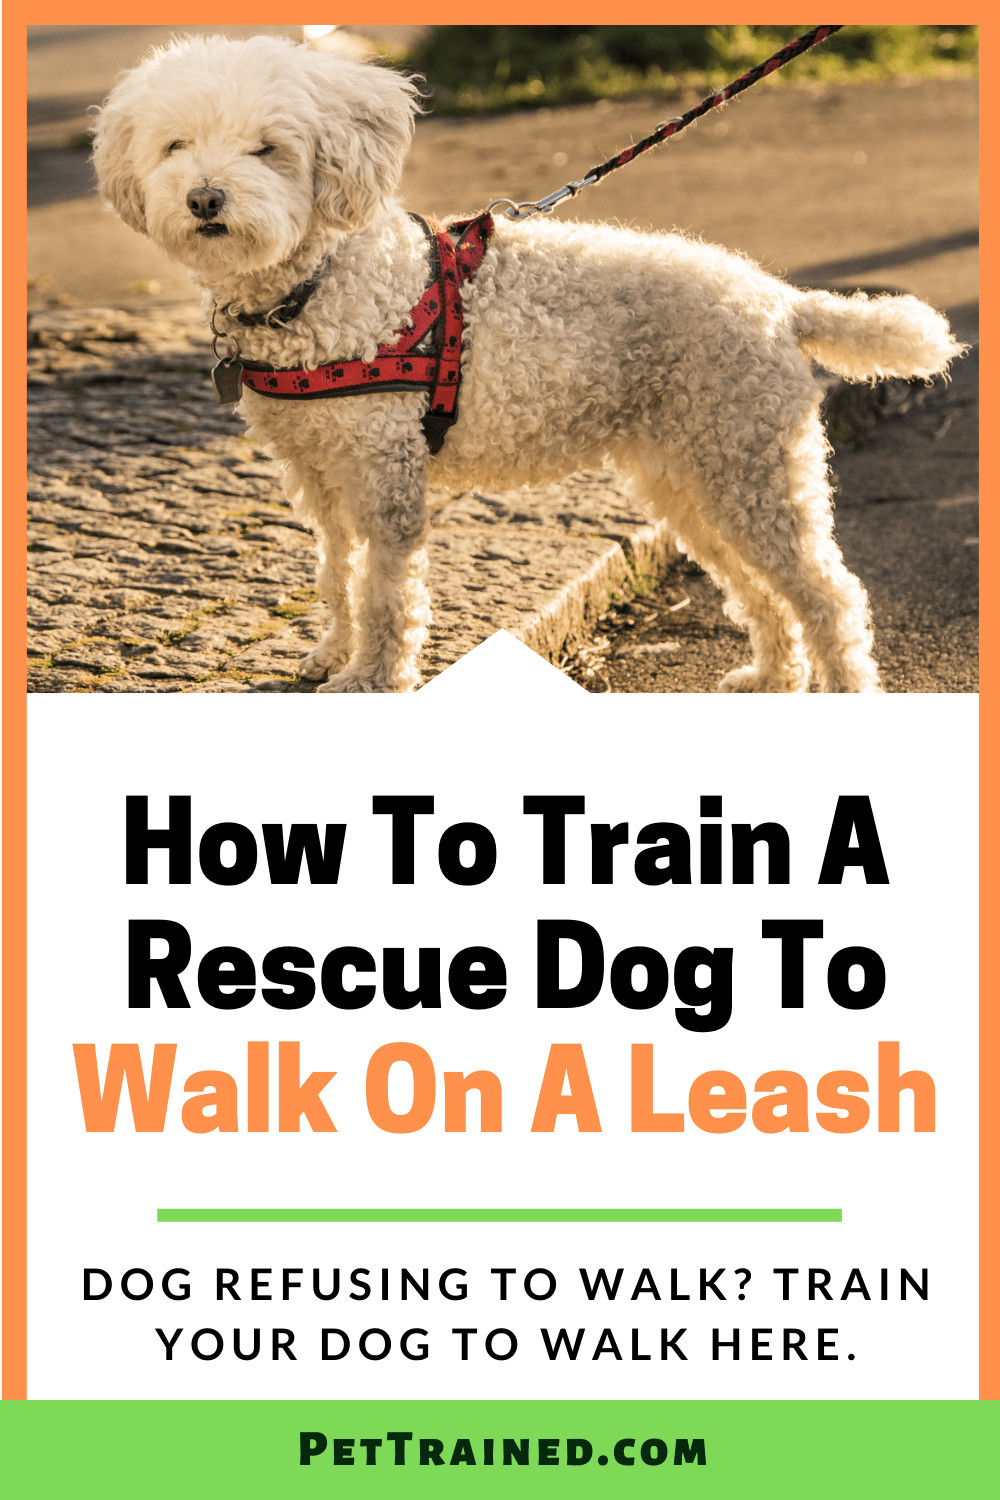 How to teach a rescue dog to walk on a leash